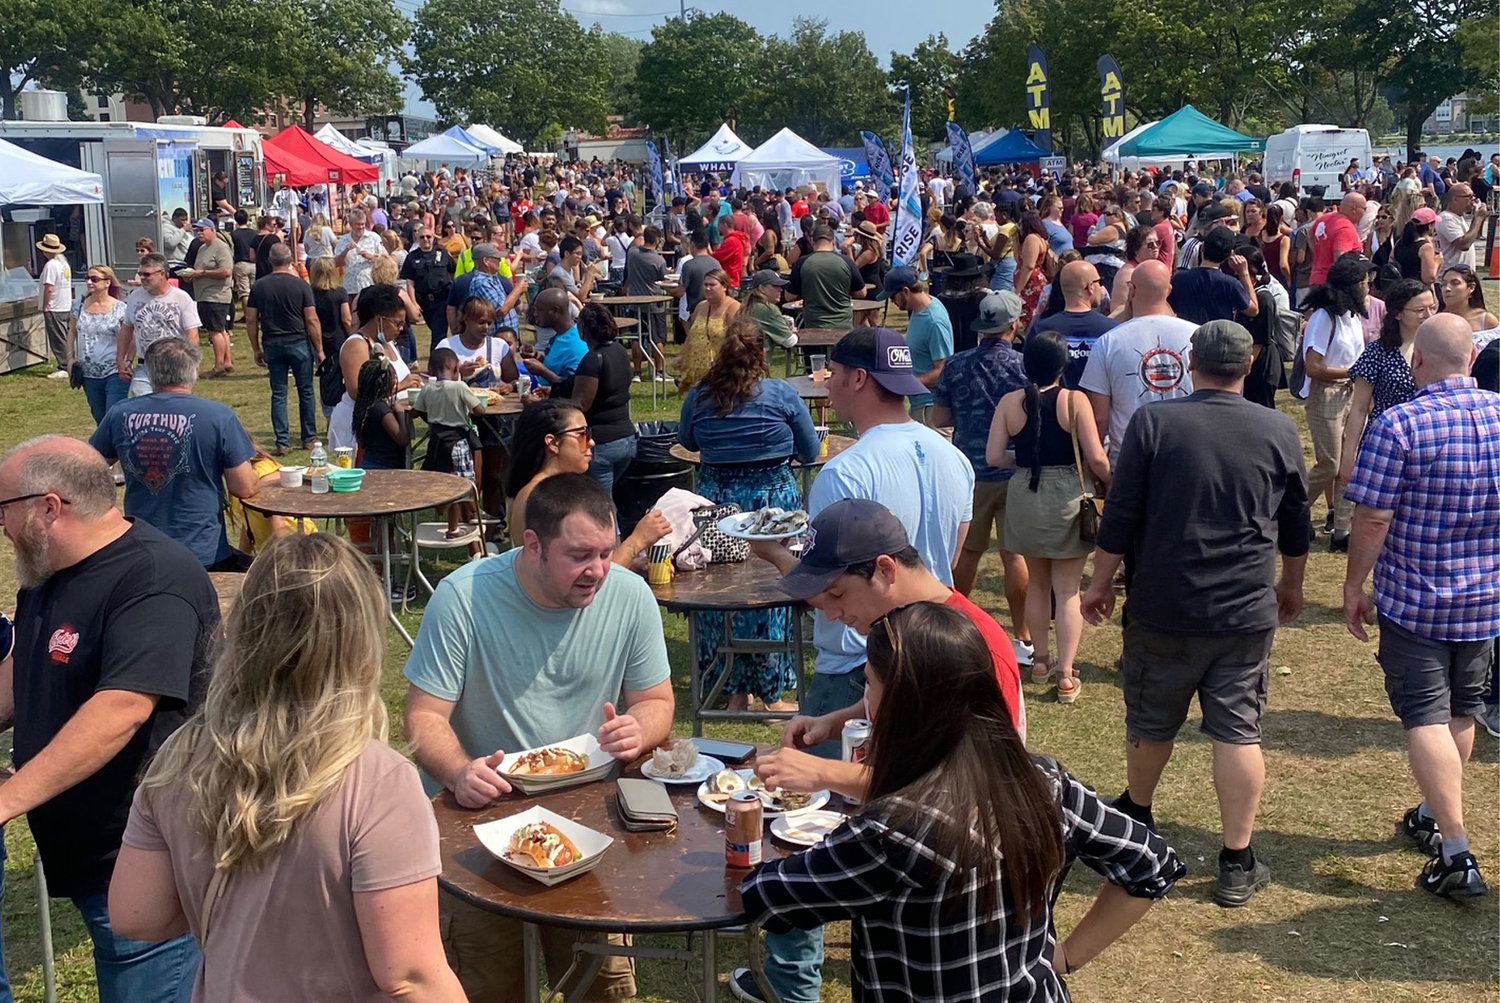 India Point Park transforms for the RI Seafood Festival